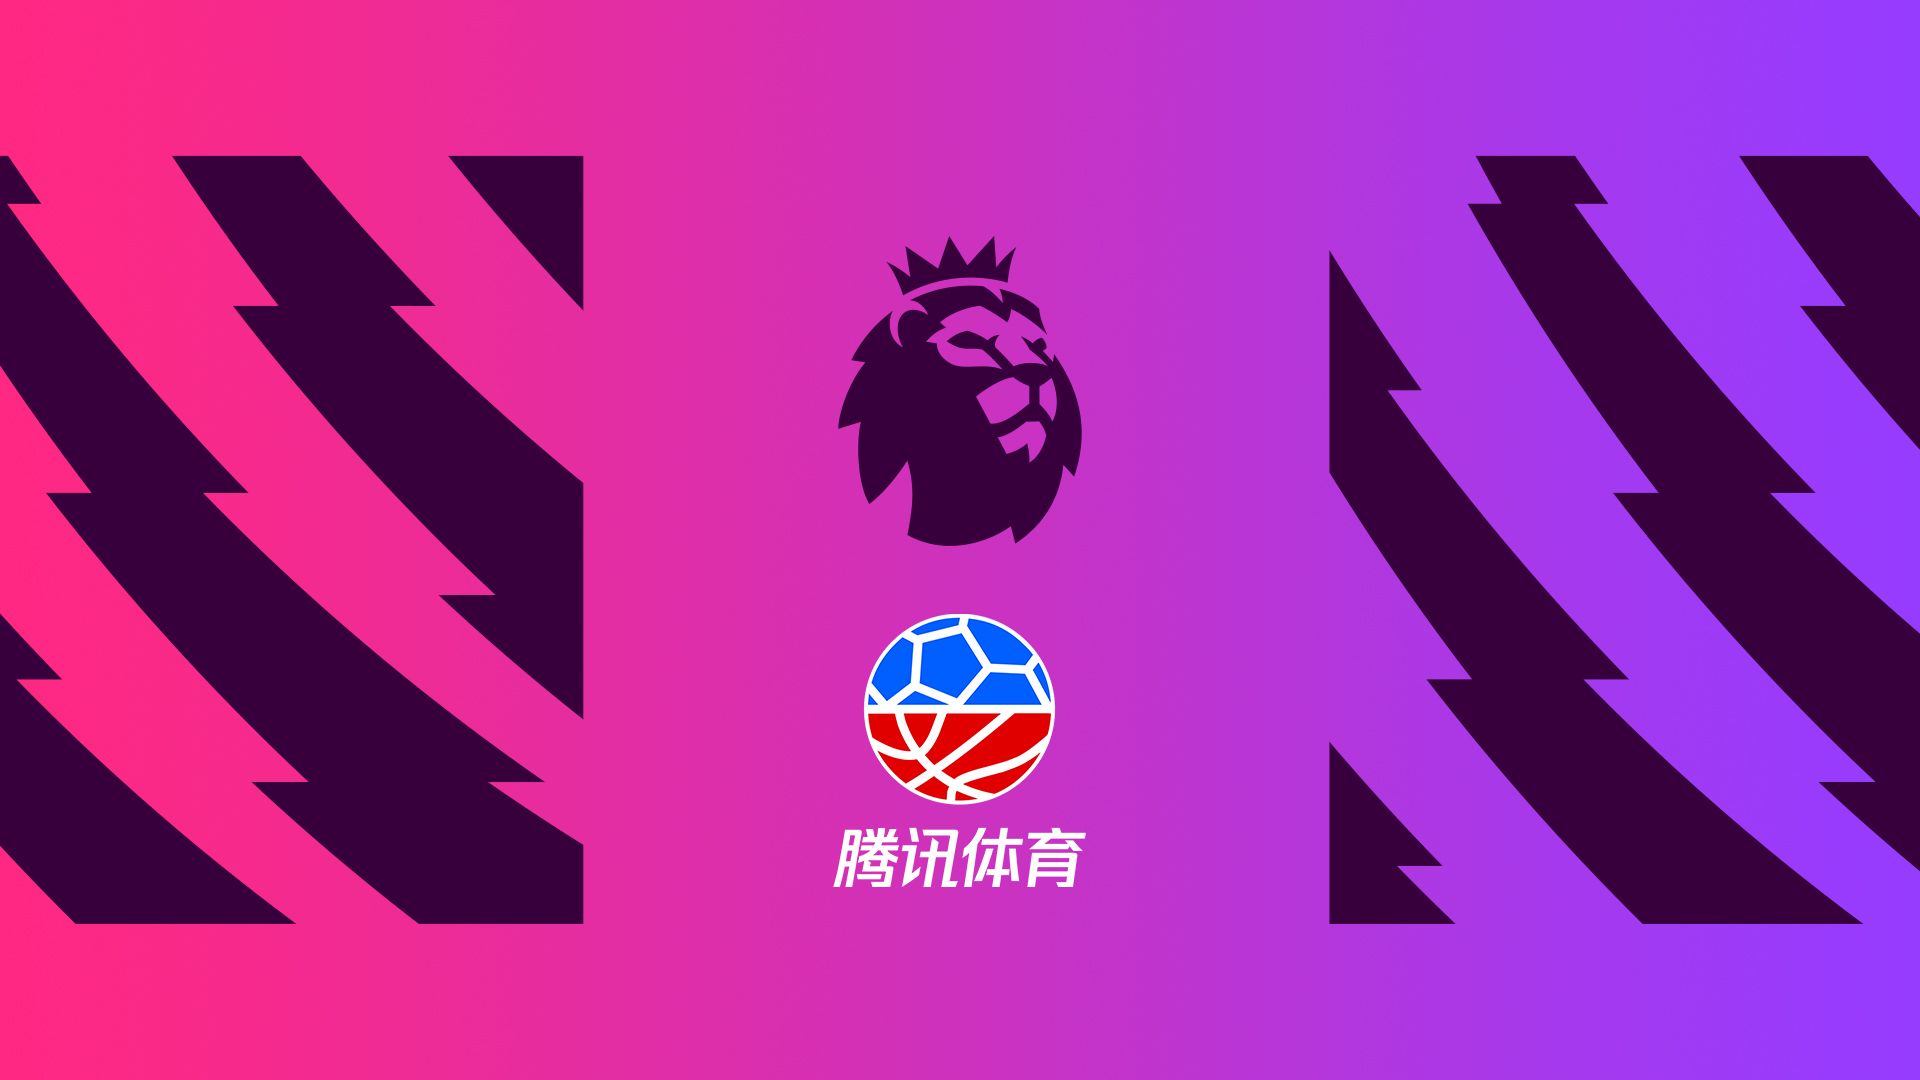 Premier League agrees partnership in China with Tencent Sports